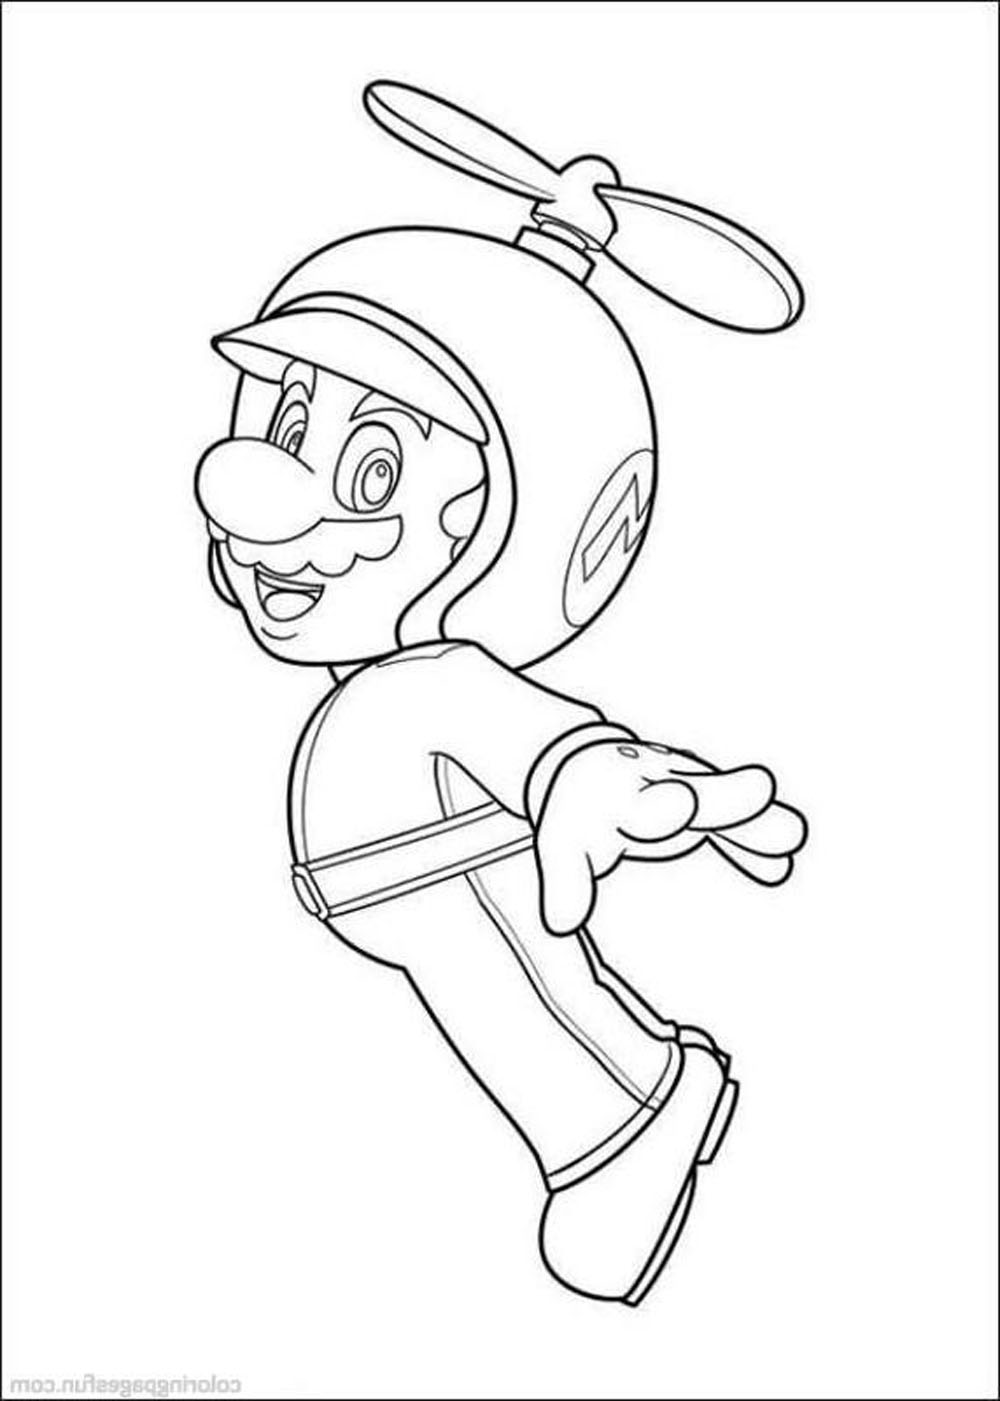 Download Mario Coloring Pages Themes - Best Apps For Kids